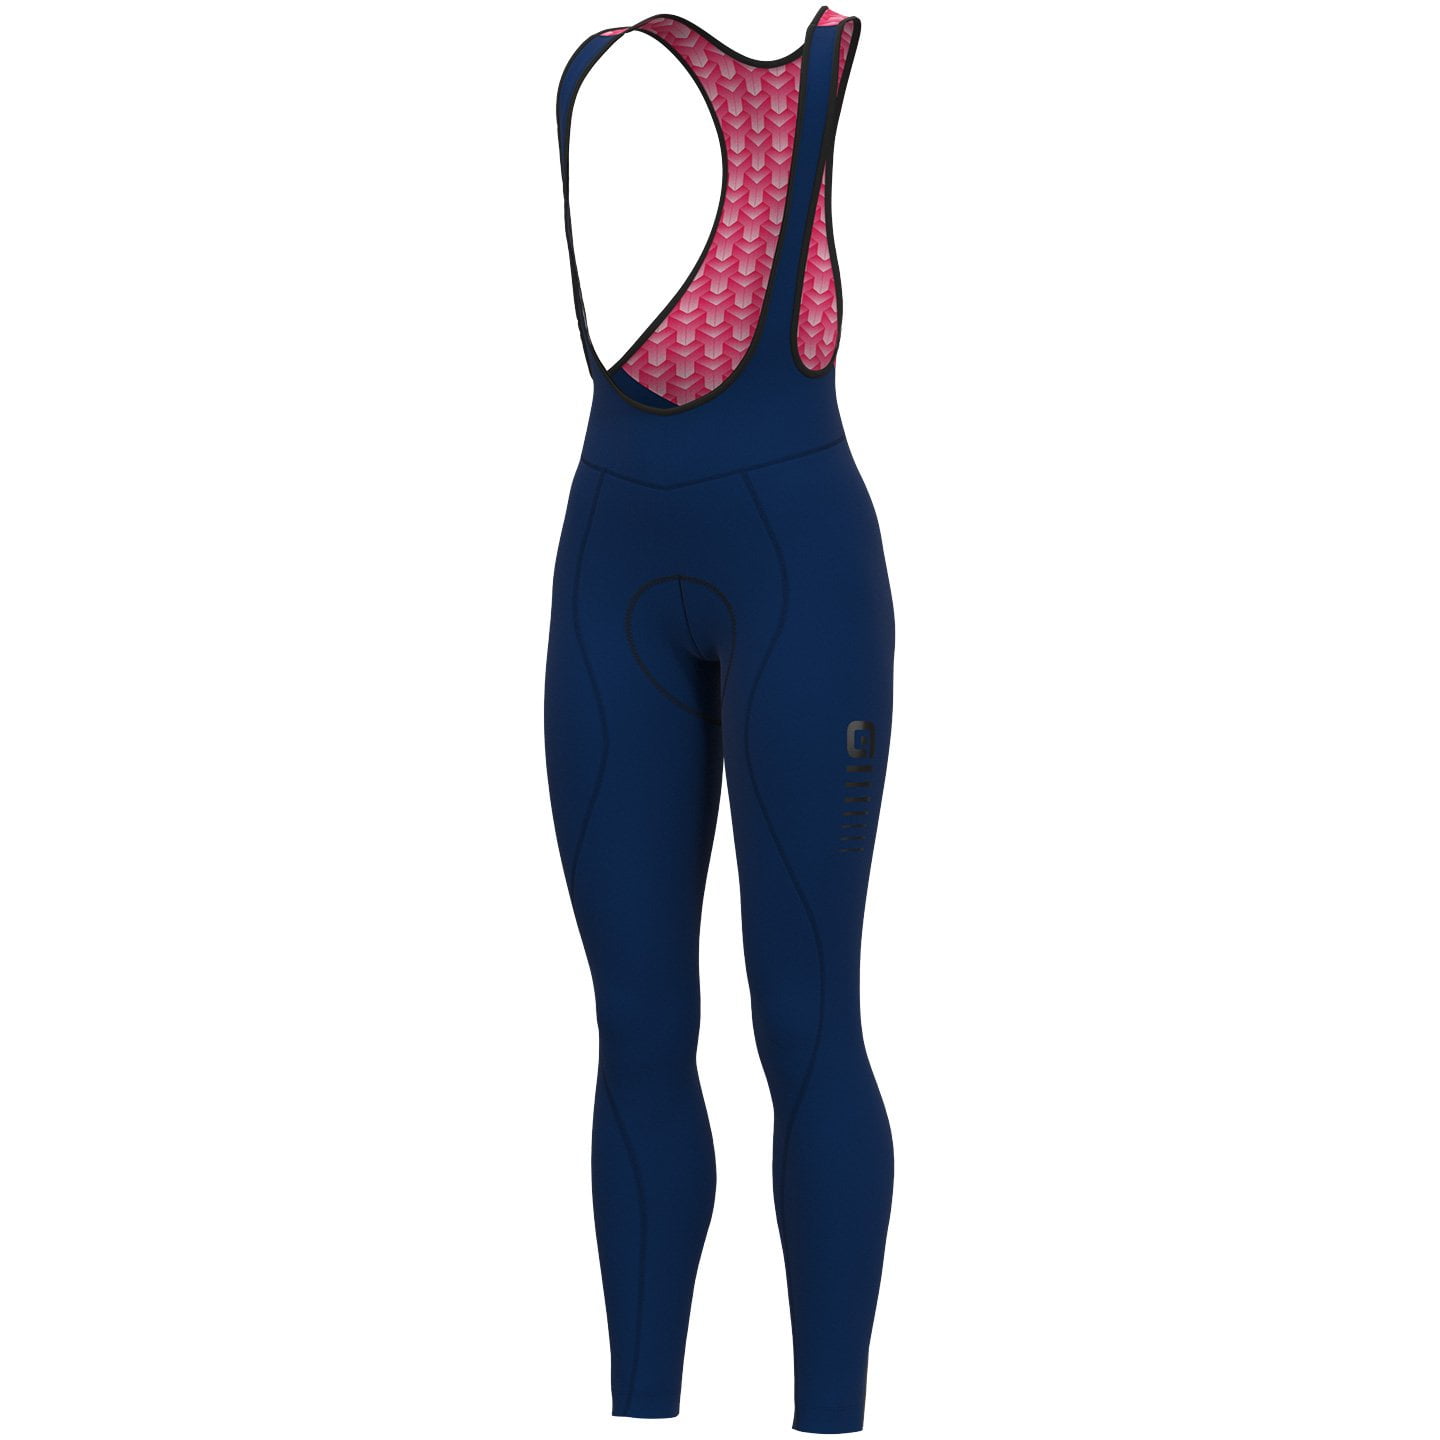 ALE Essential Women’s Bib Tights Women’s Bib Tights, size S, Cycle tights, Cycle clothing